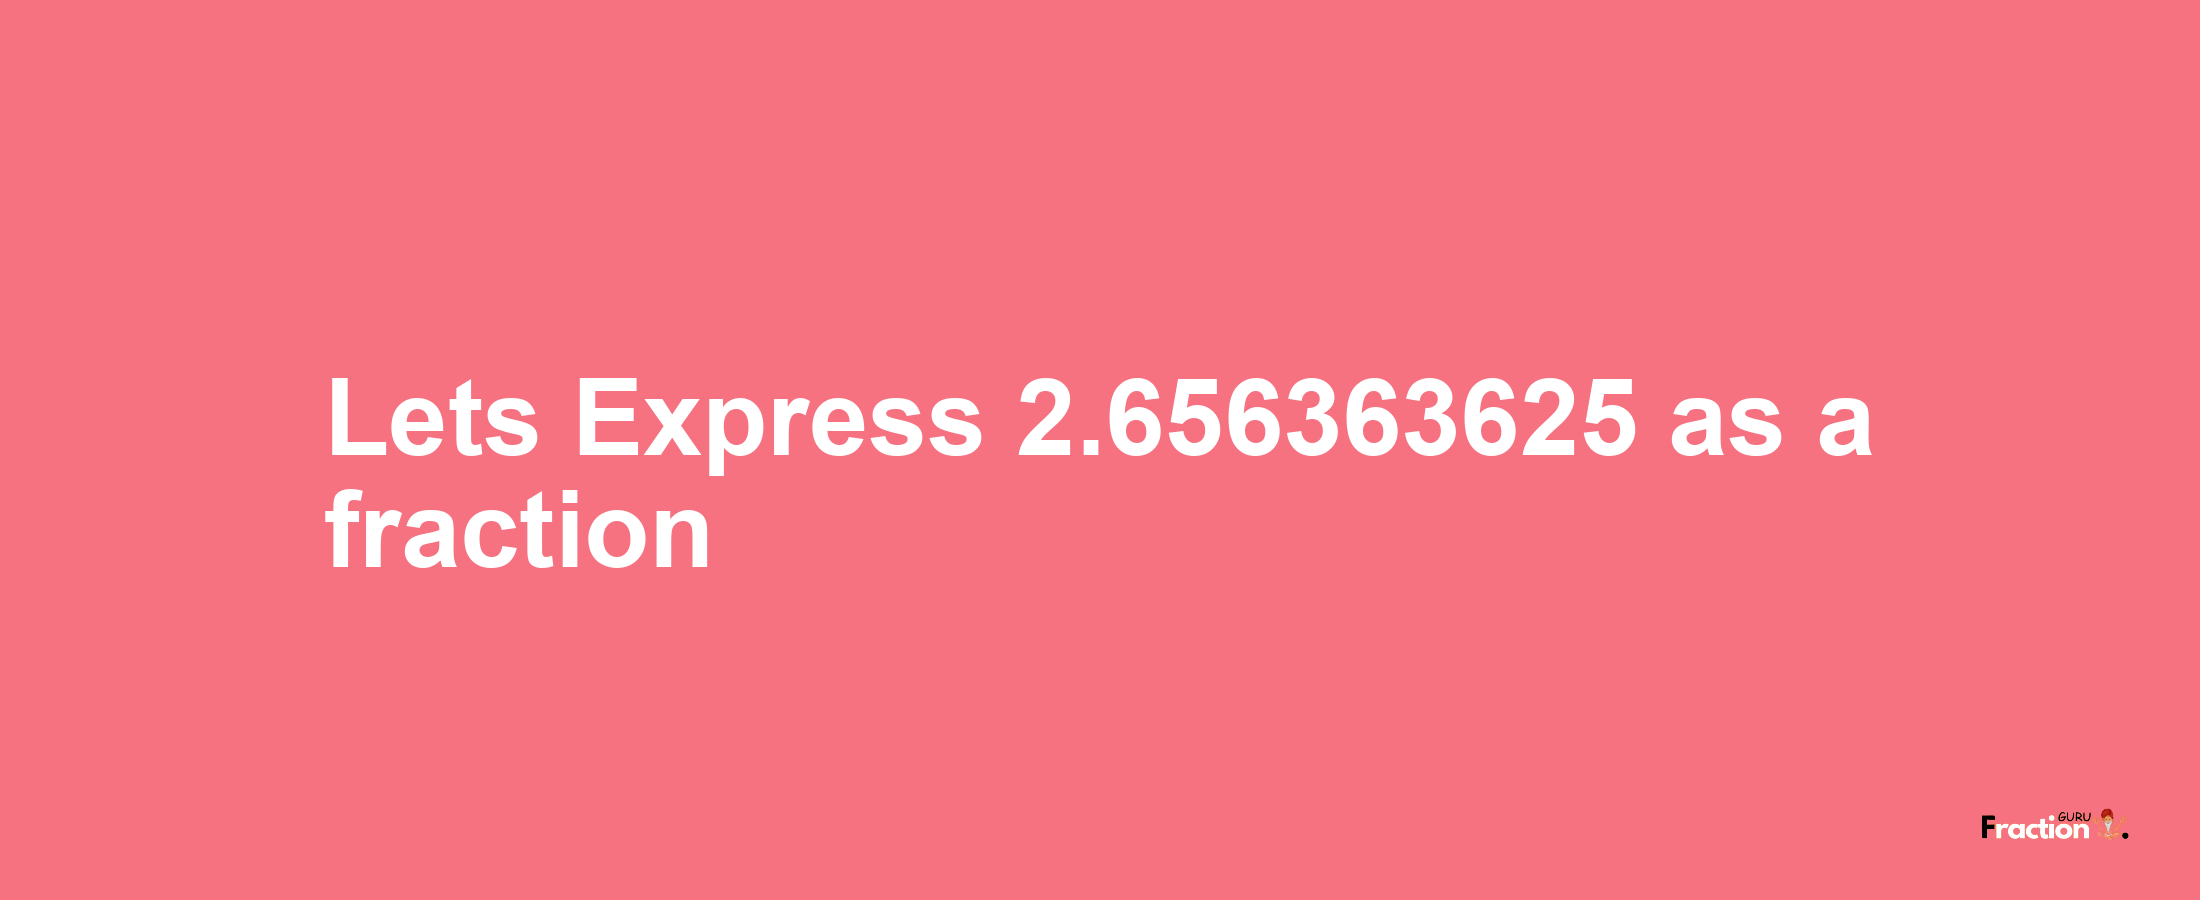 Lets Express 2.656363625 as afraction